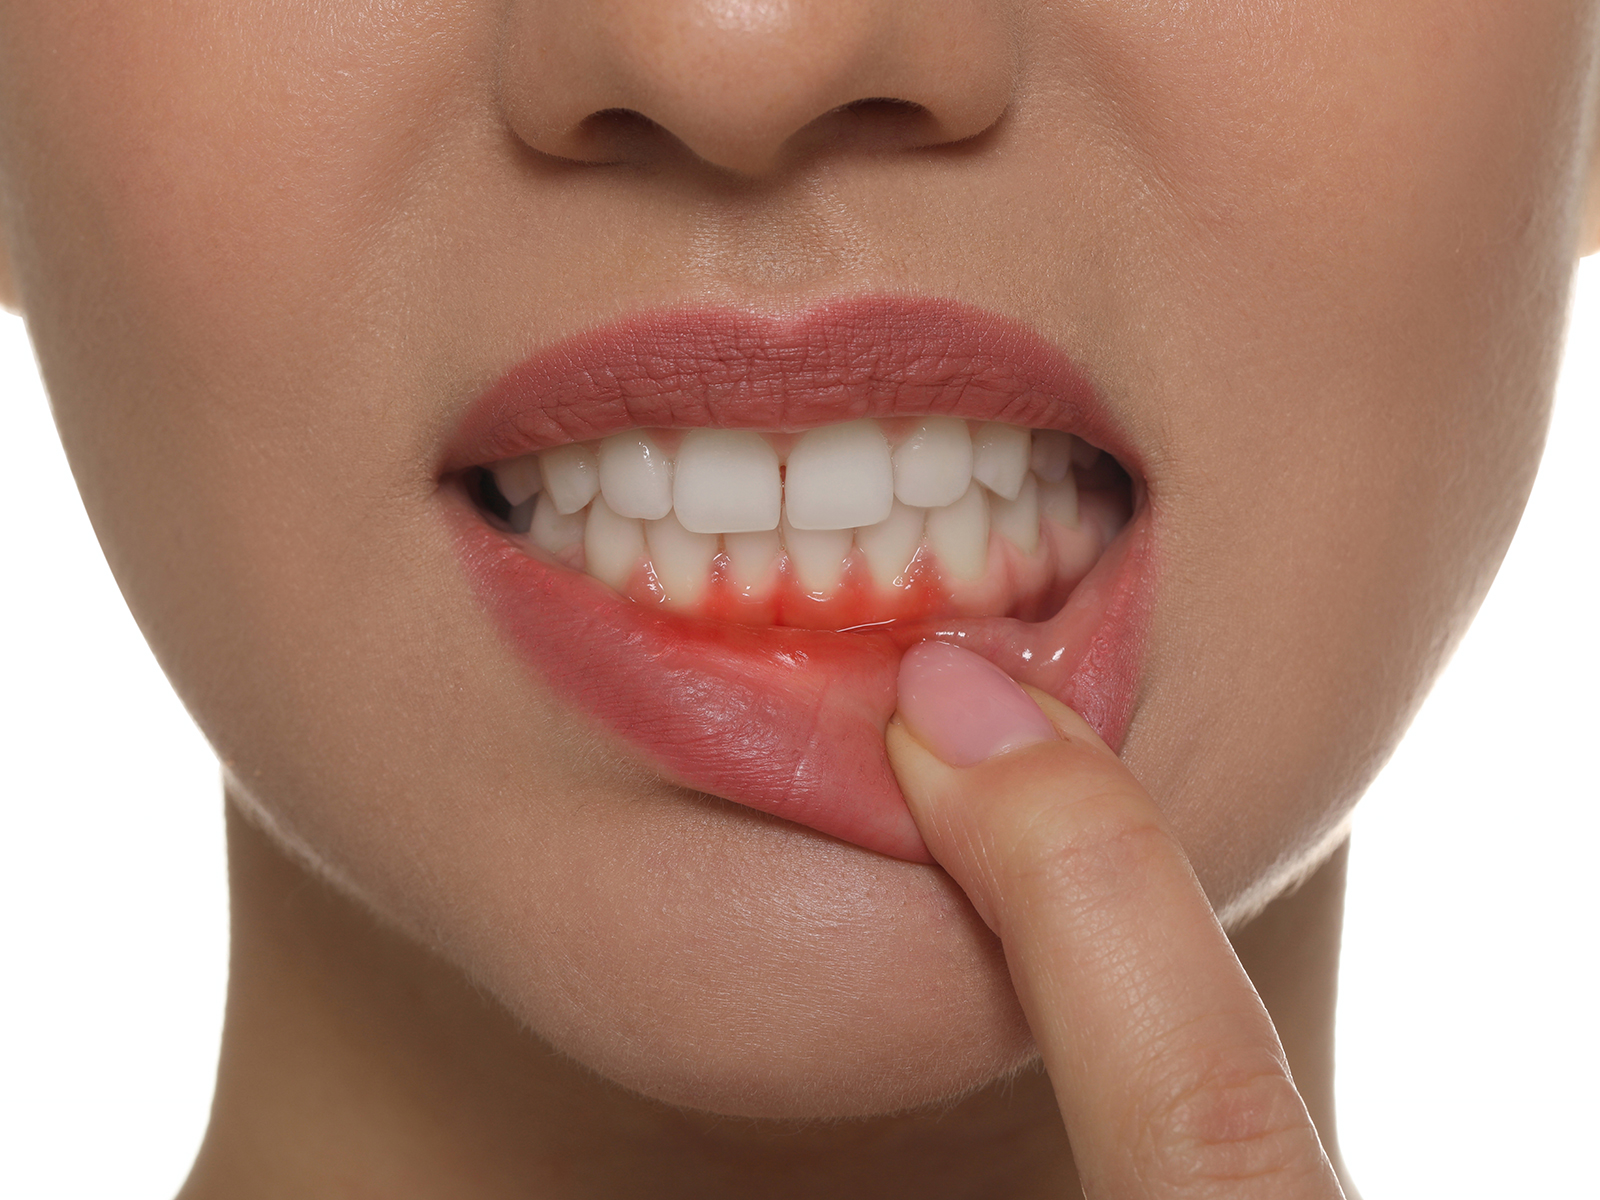 Which Vitamin Deficiency Causes Gum Problems?